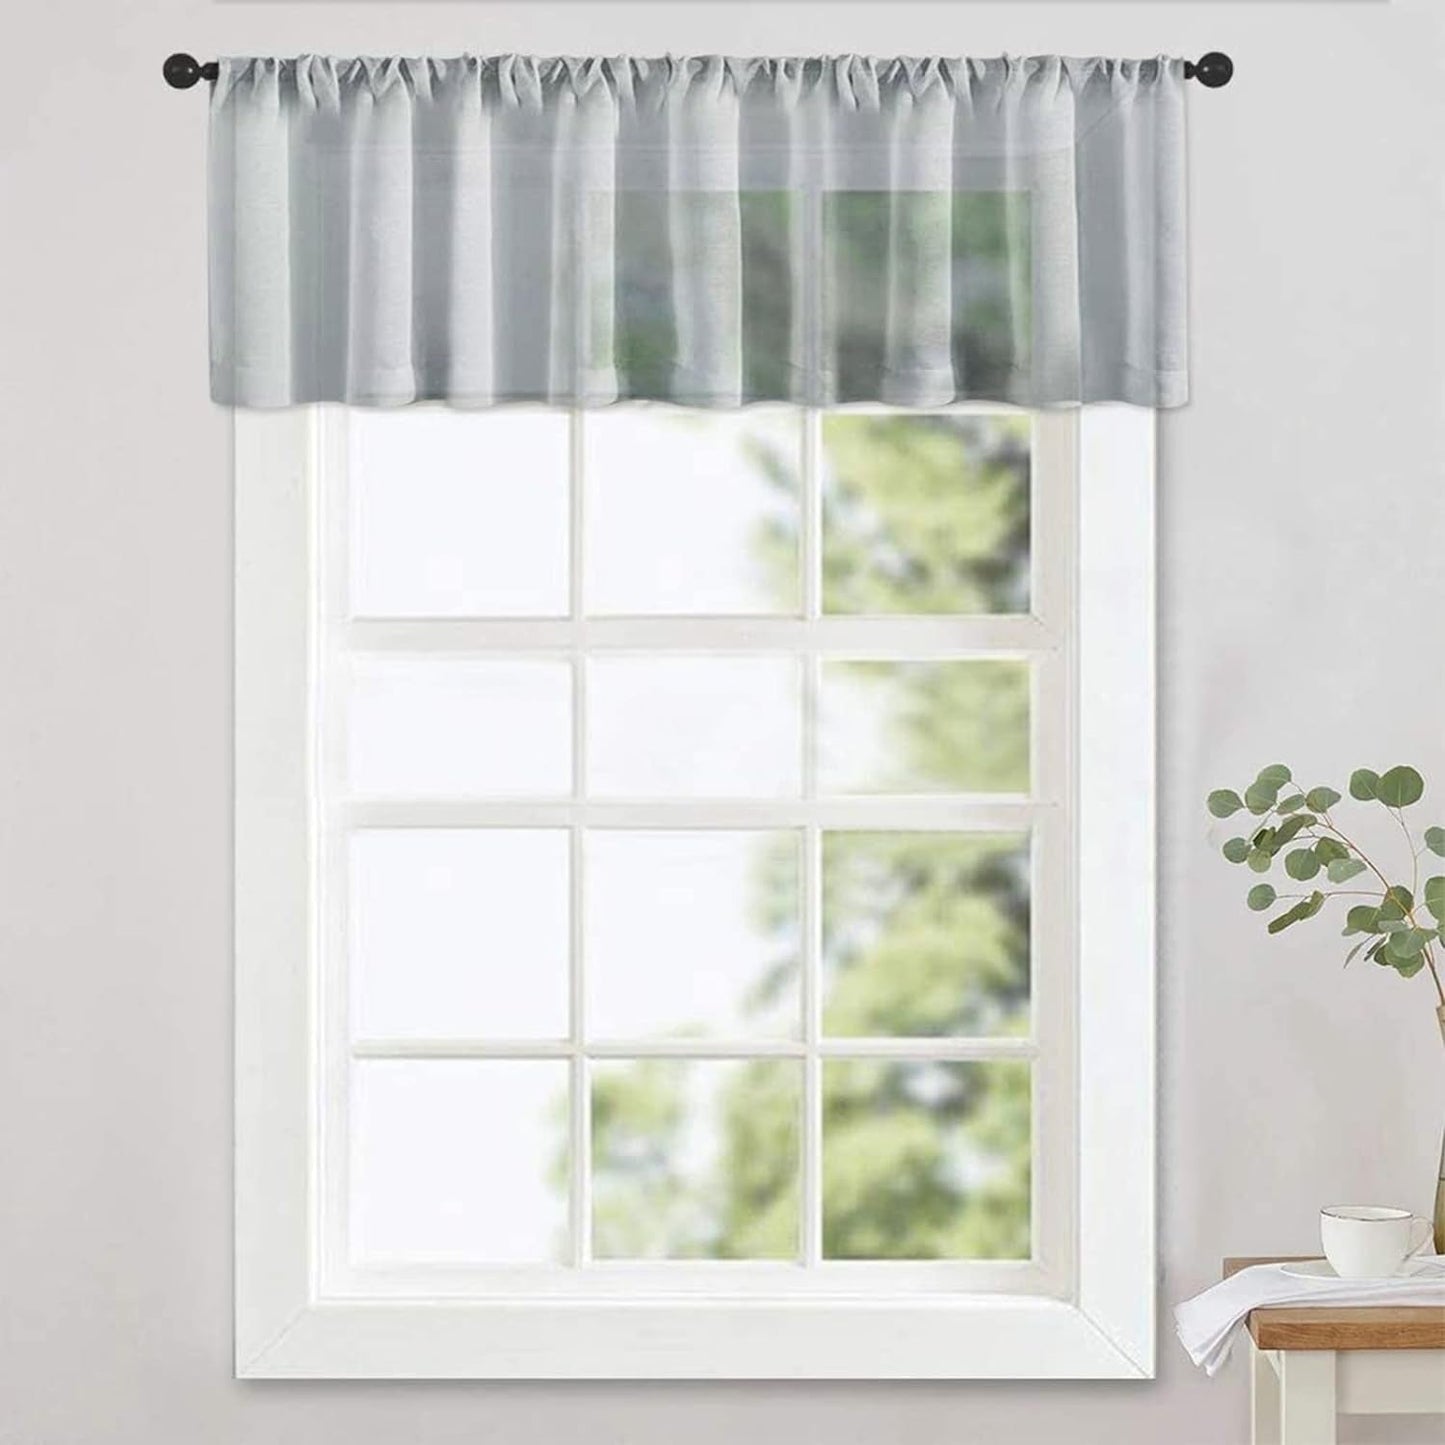 MRTREES White Sheer Valance Curtain 54 X 16 Inches Long Living Room Curtains Valances Bedroom Window Light Filtering Voile Sheer Panels Rod Pocket Window Treatments, 1 Piece